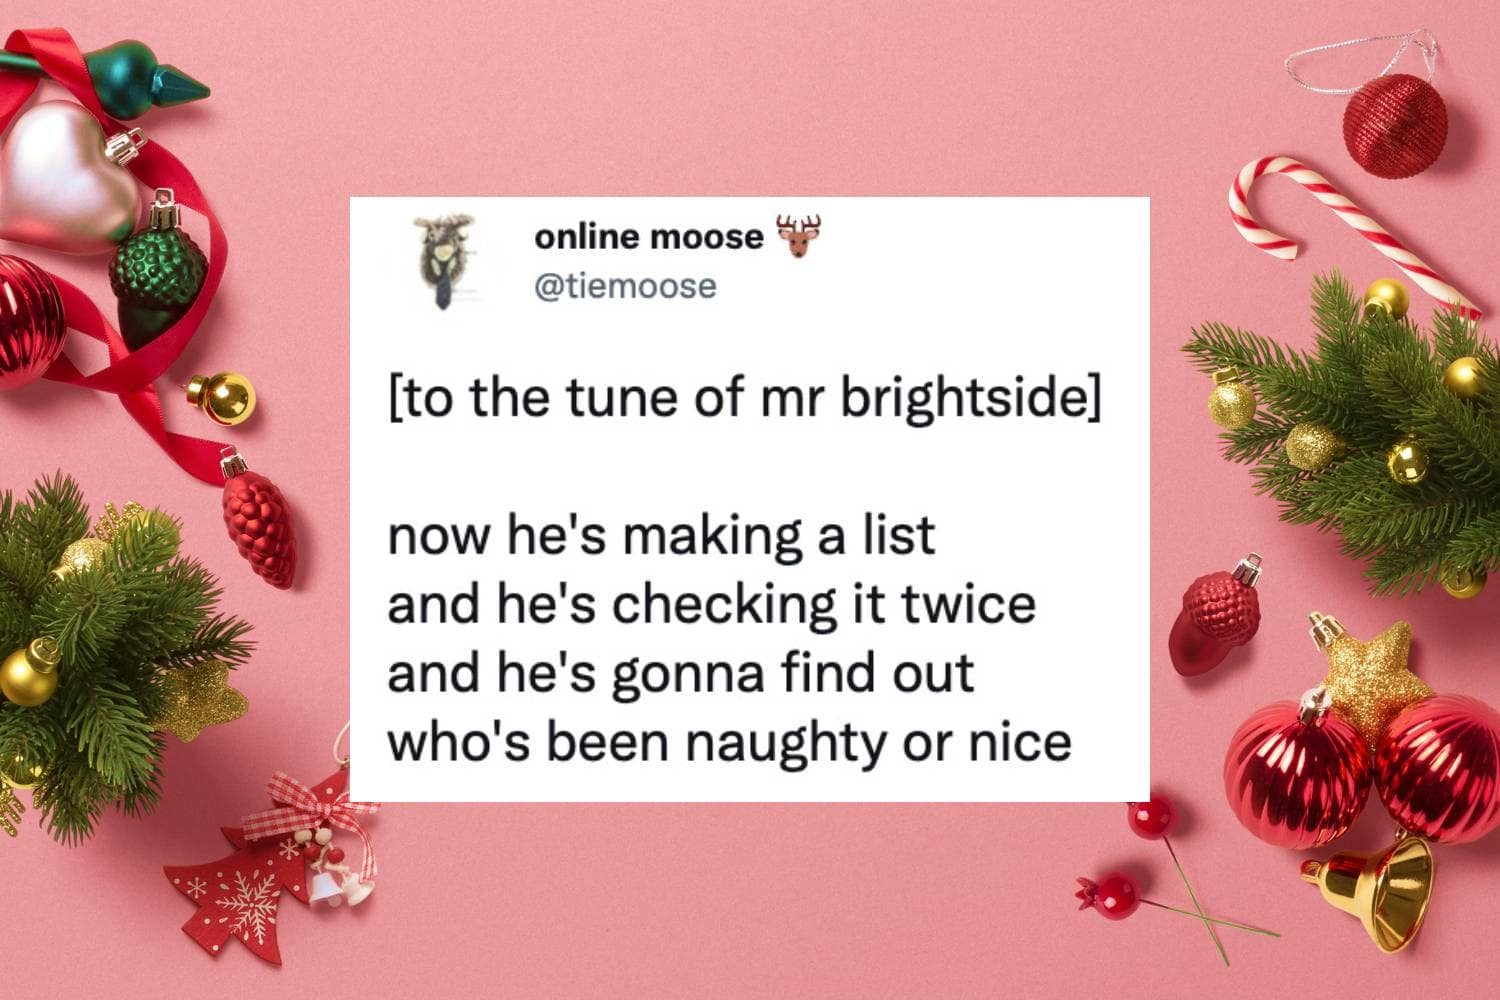 The Funniest Christmas Memes And Tweets - Let's Eat Cake